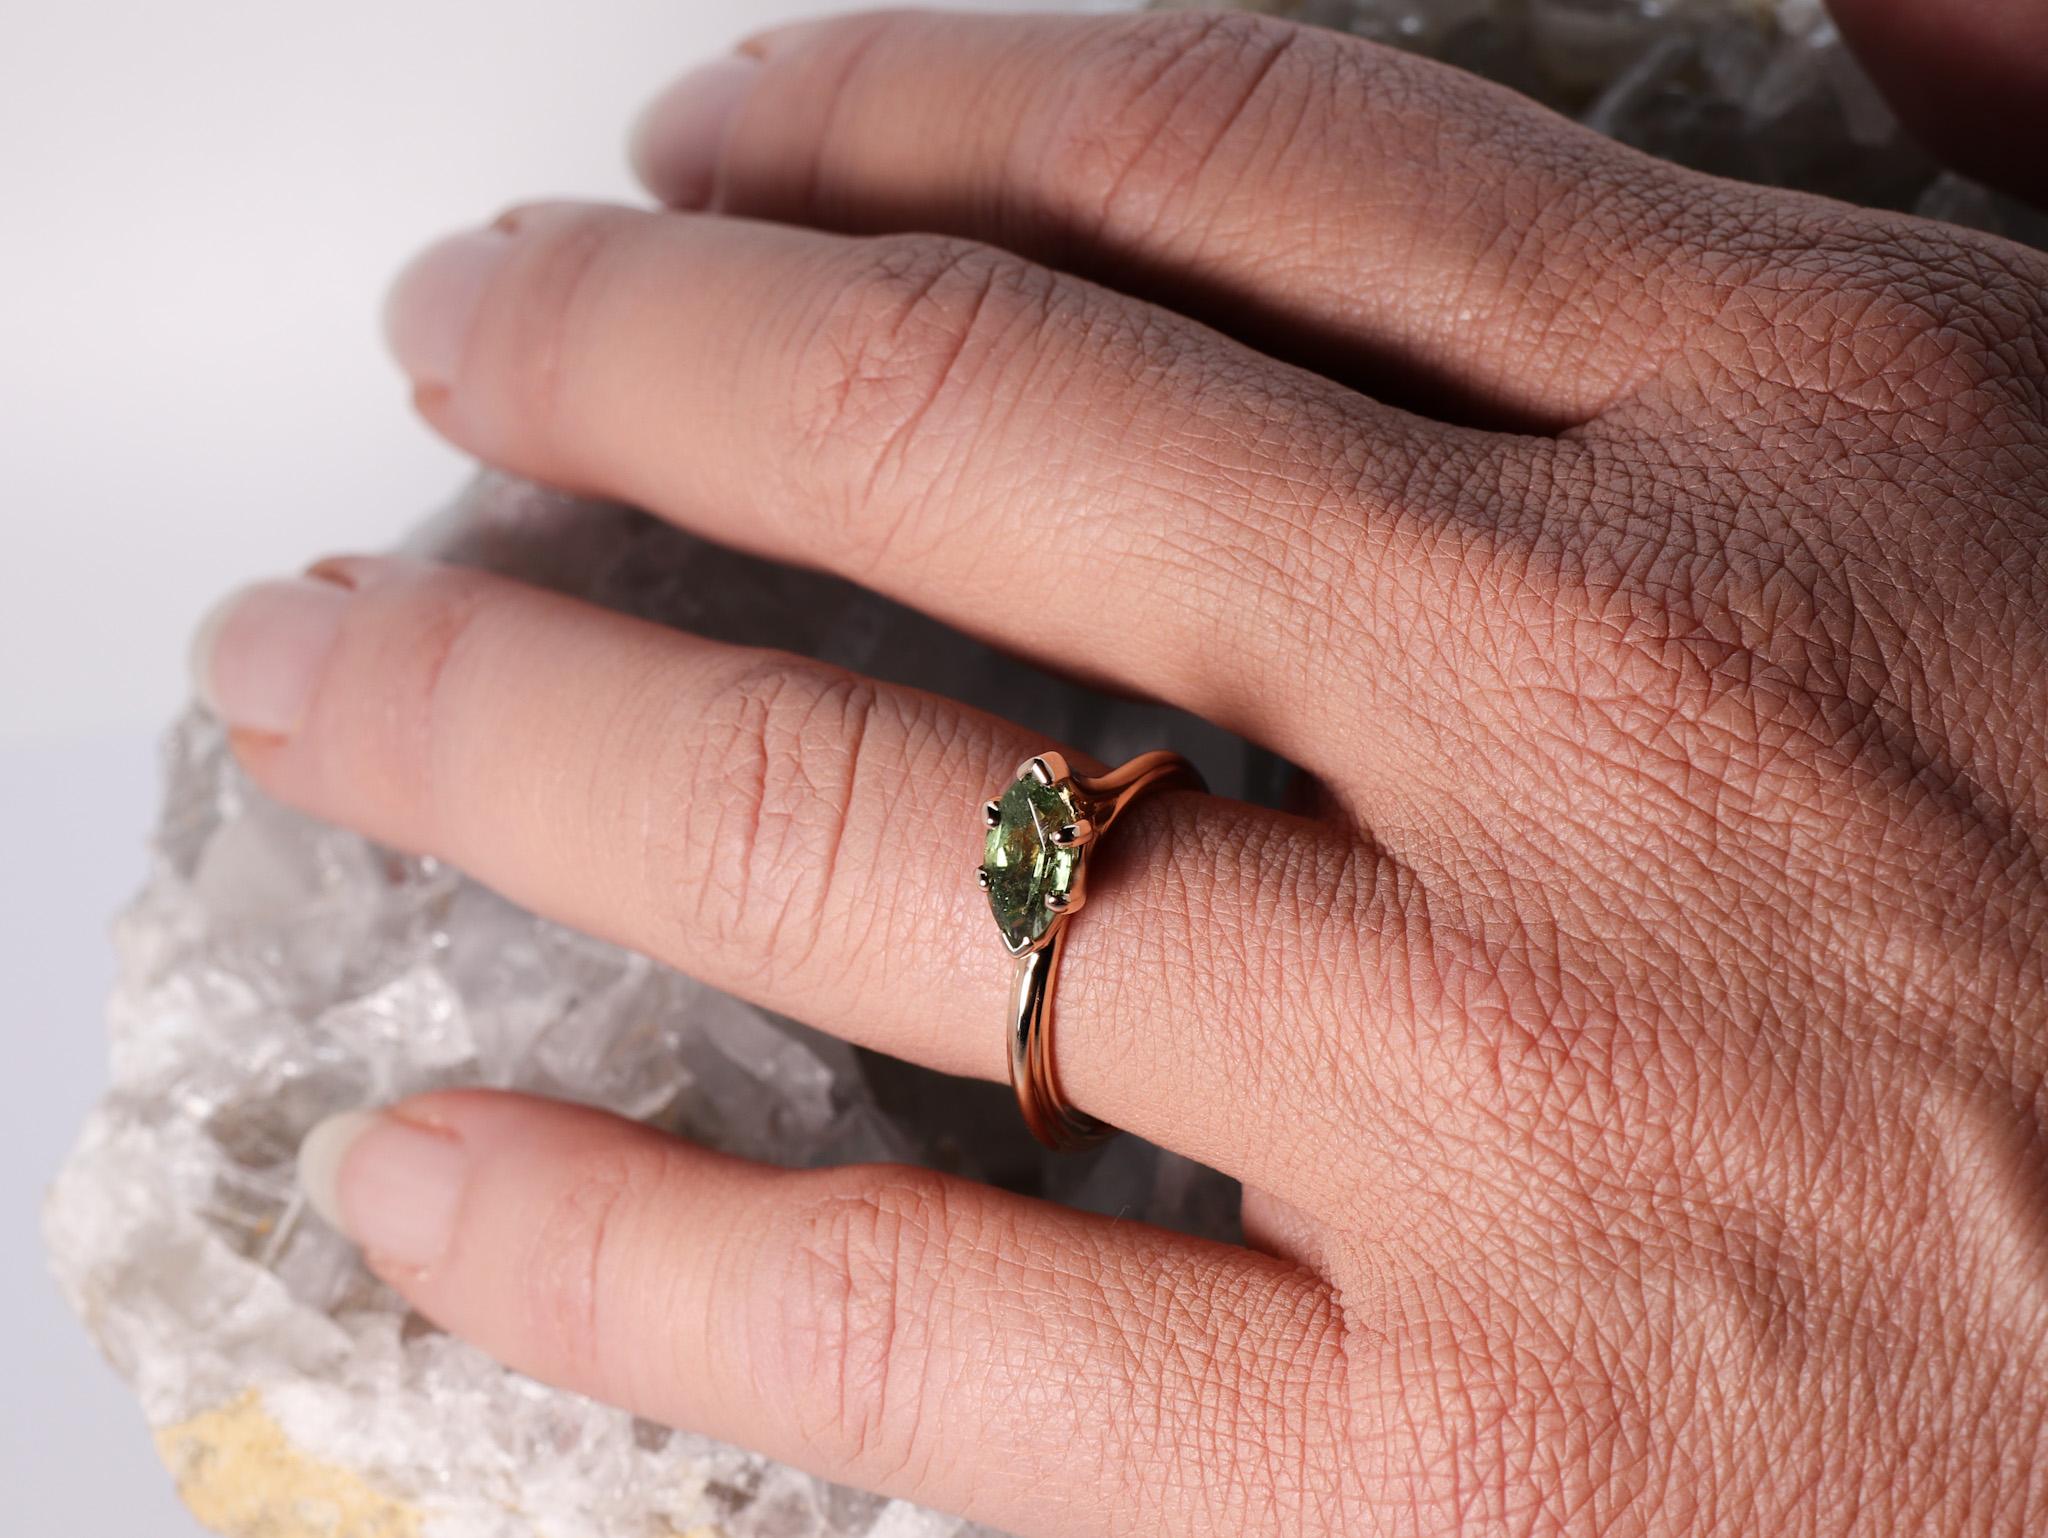 18K Rose Gold Asymmetric Design Stackable Intense Green Tormaline Cocktail Ring
The Egle ring is made of 18 karat rose gold and features a marquise mixed cut natural dark green tourmaline around 1.33 carats, which measures 4.7 mm by 11 mm by 4 mm.